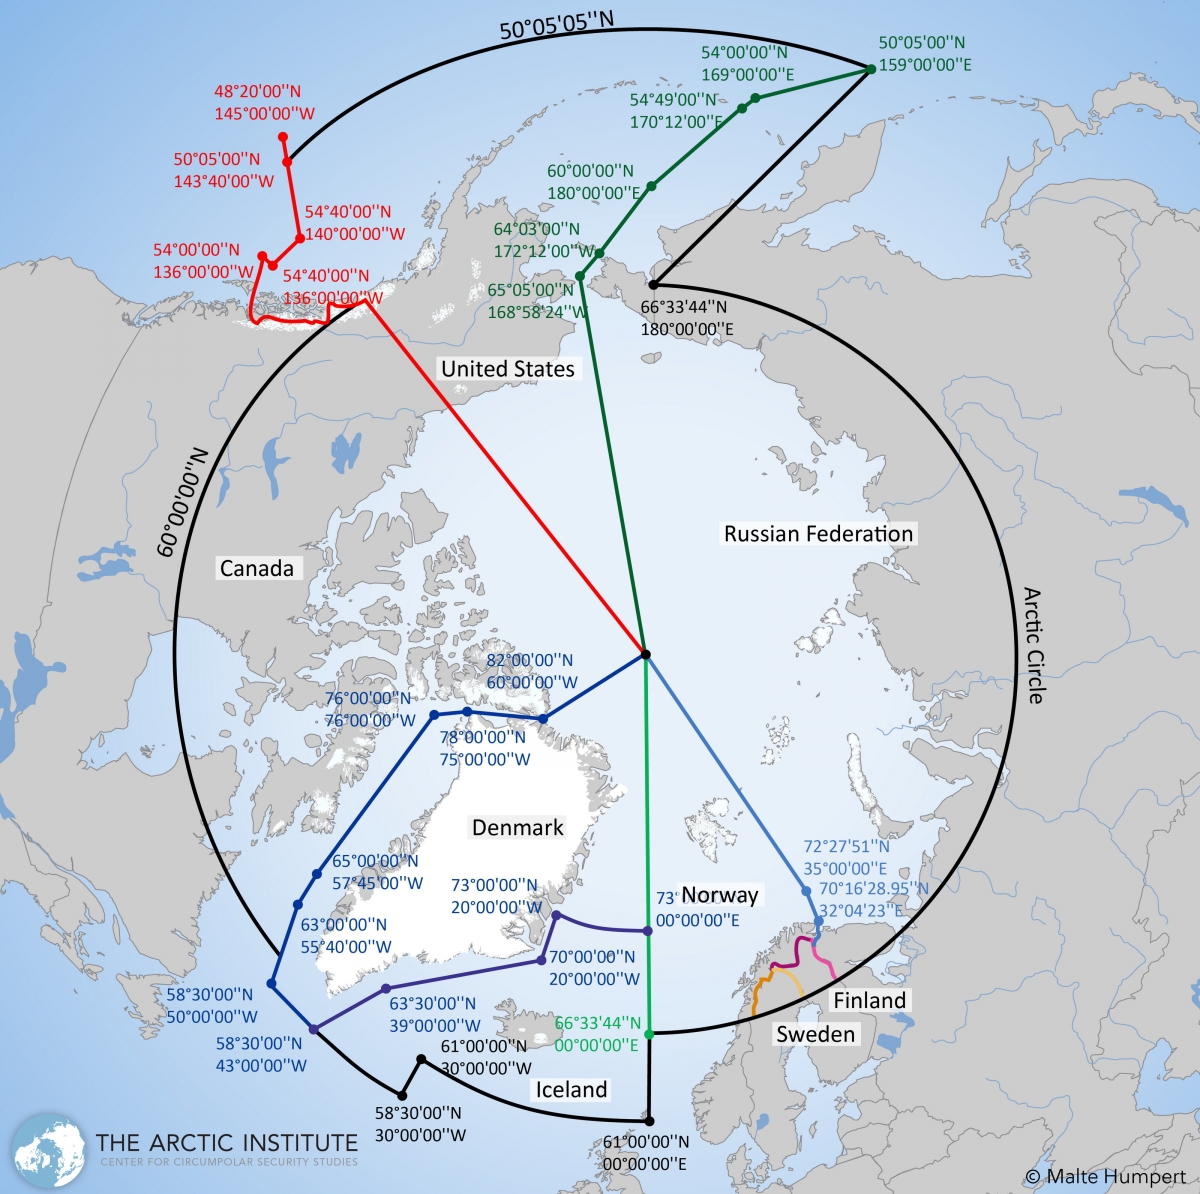 Arctic Search and Rescue Zones by Nations